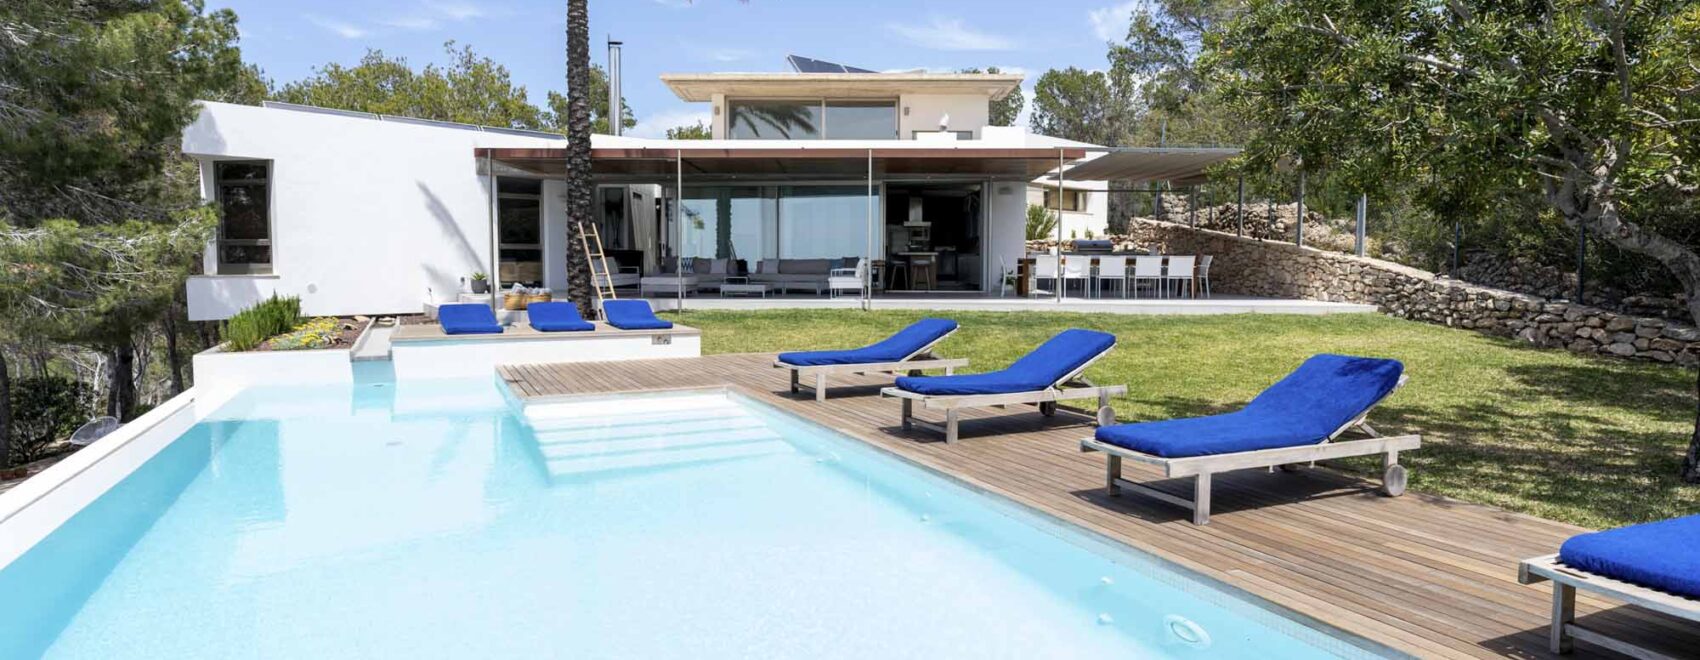 Luxurious Villa Sol Post in Ibiza with a large swimming pool, sun loungers, and lush garden, showcasing serene sunset views